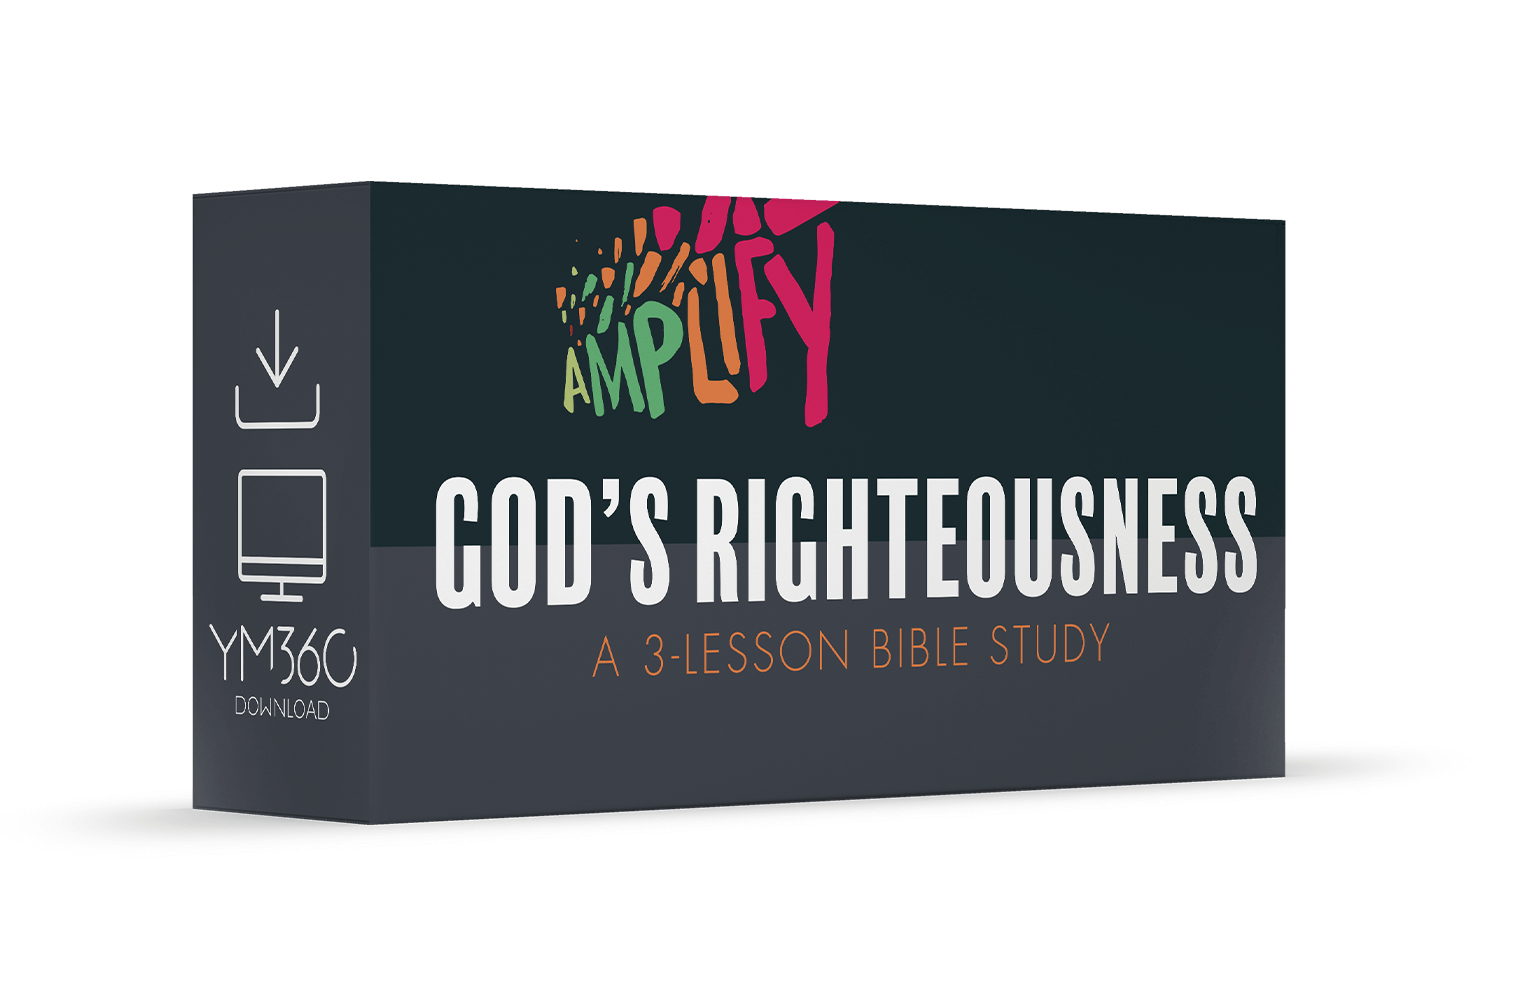 God's Righteousness: A 3-Lesson Bible Study